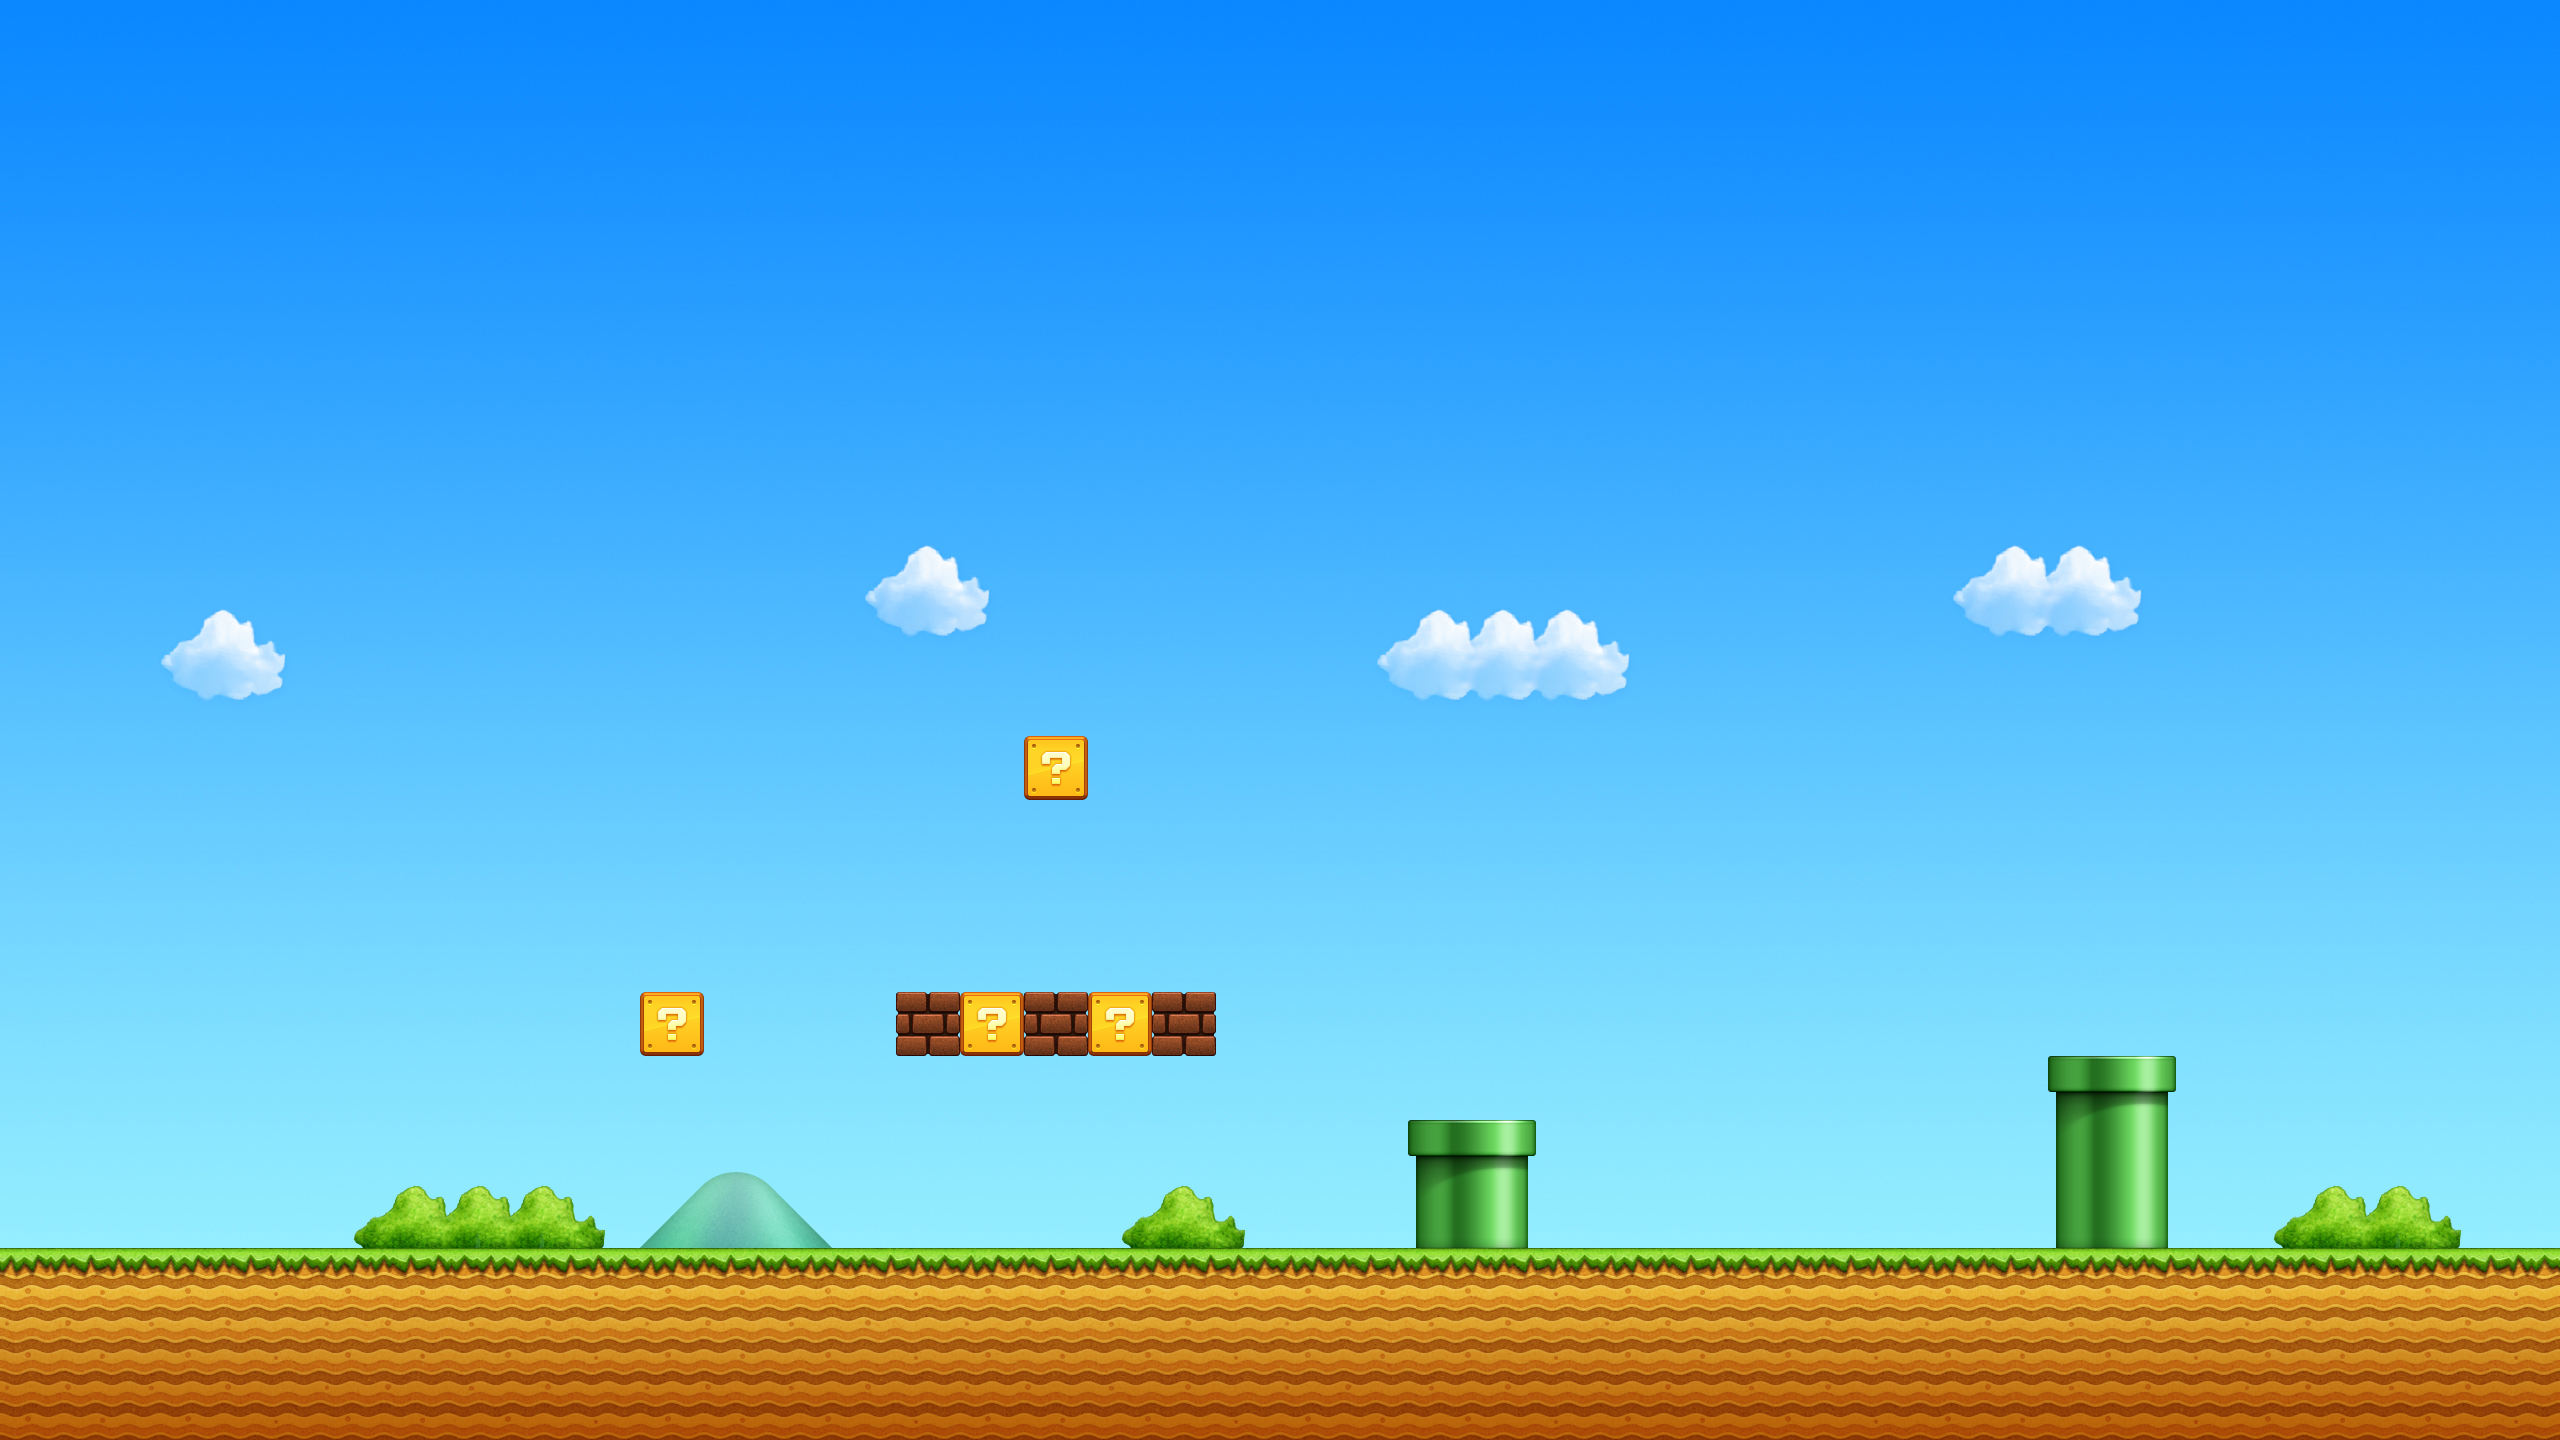 Super Mario Bros. Wallpapers, Pictures, Images